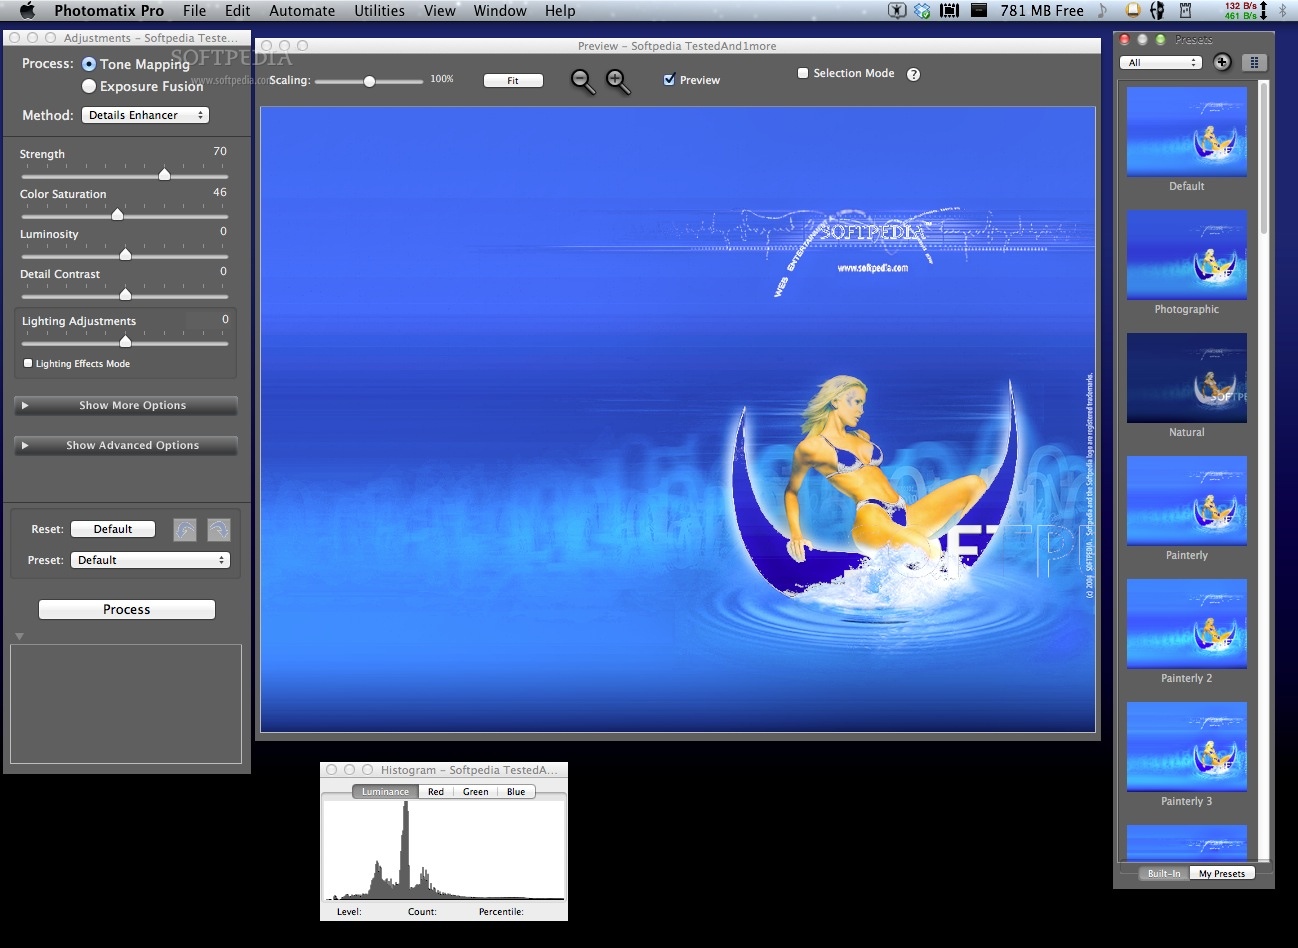 download the new version for mac HDRsoft Photomatix Pro 7.1.1